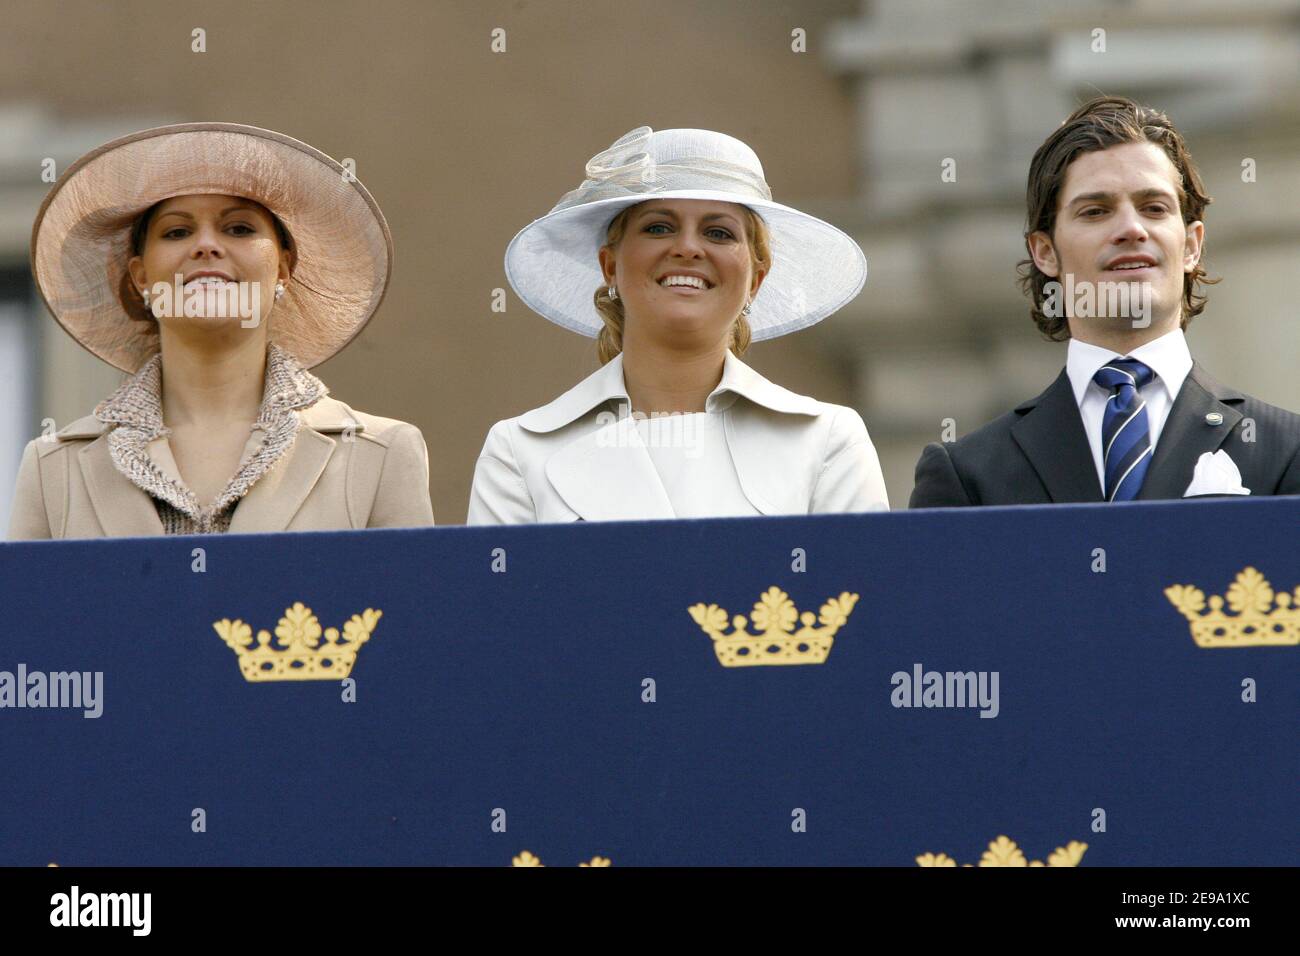 Crown Princess Victoria, Princess Madeleine and Prince Carl Philip during the celebration of the 60th Birthday of Carl XVI Gustaf of Sweden in Lejonbacken Royal Palace on April 30, 2006. Photo by Nebinger/Orban/ABACAPRESS.COM Stock Photo